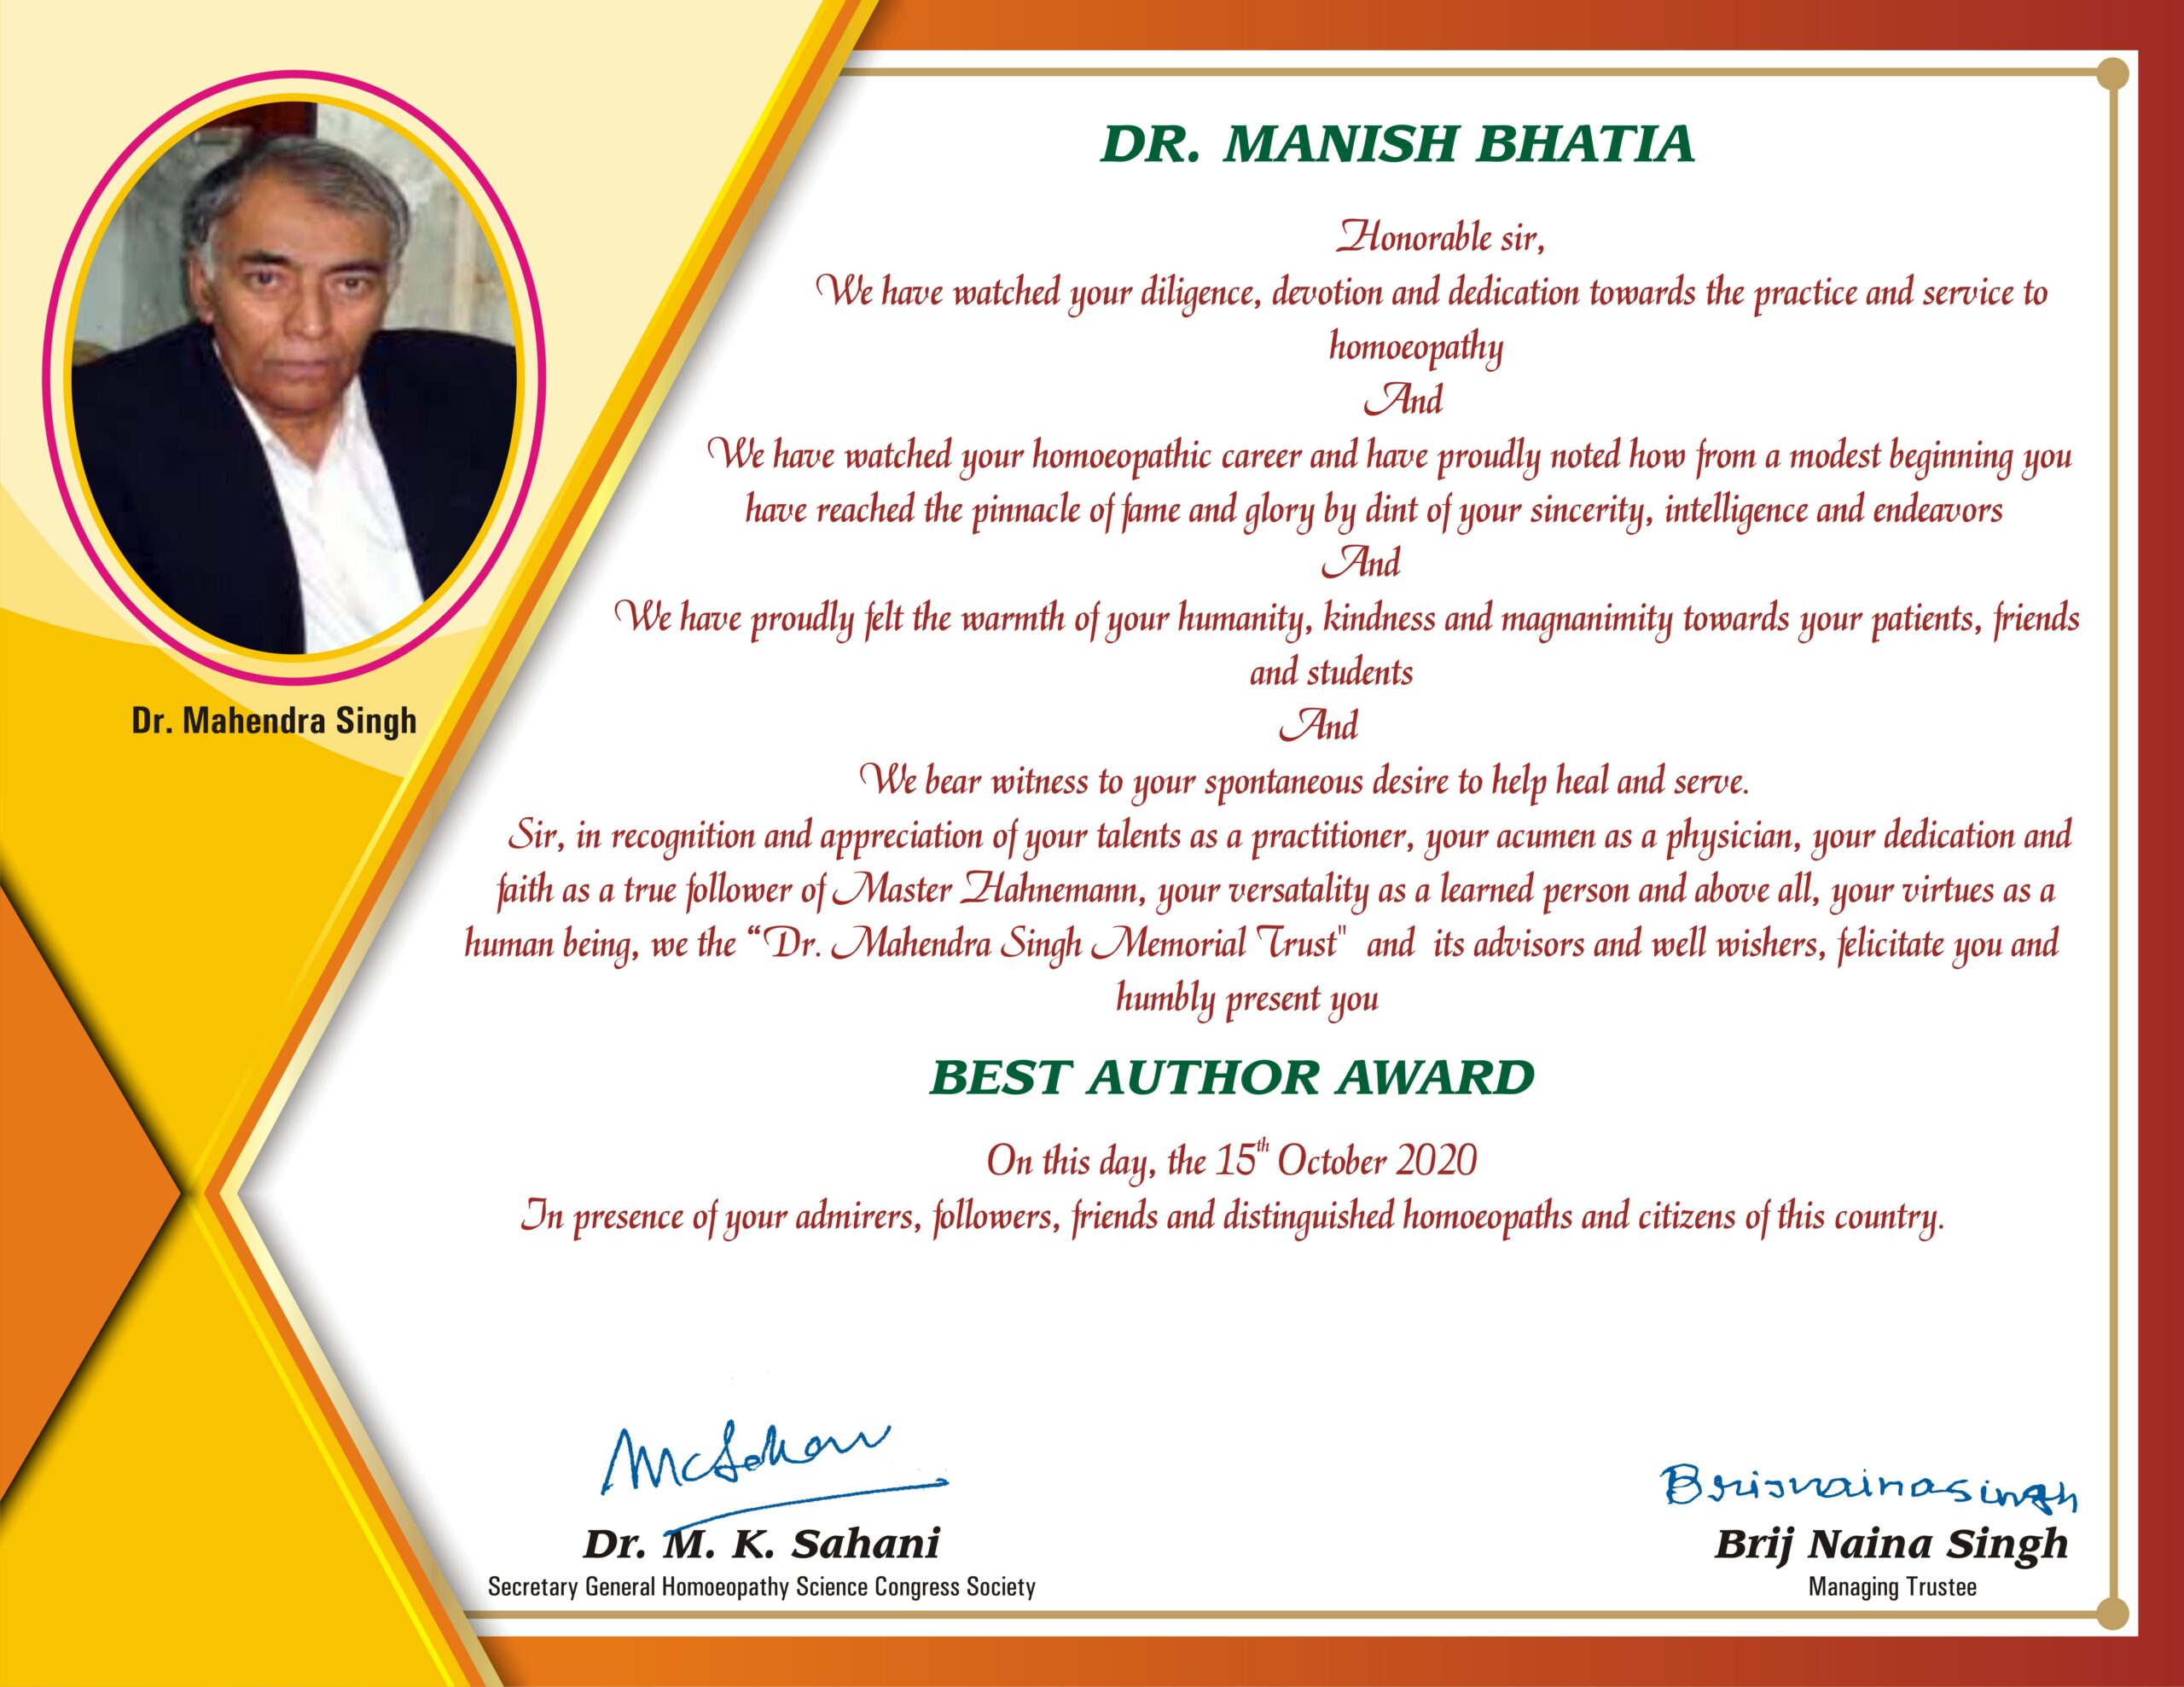 Best Homeopathy Author Award